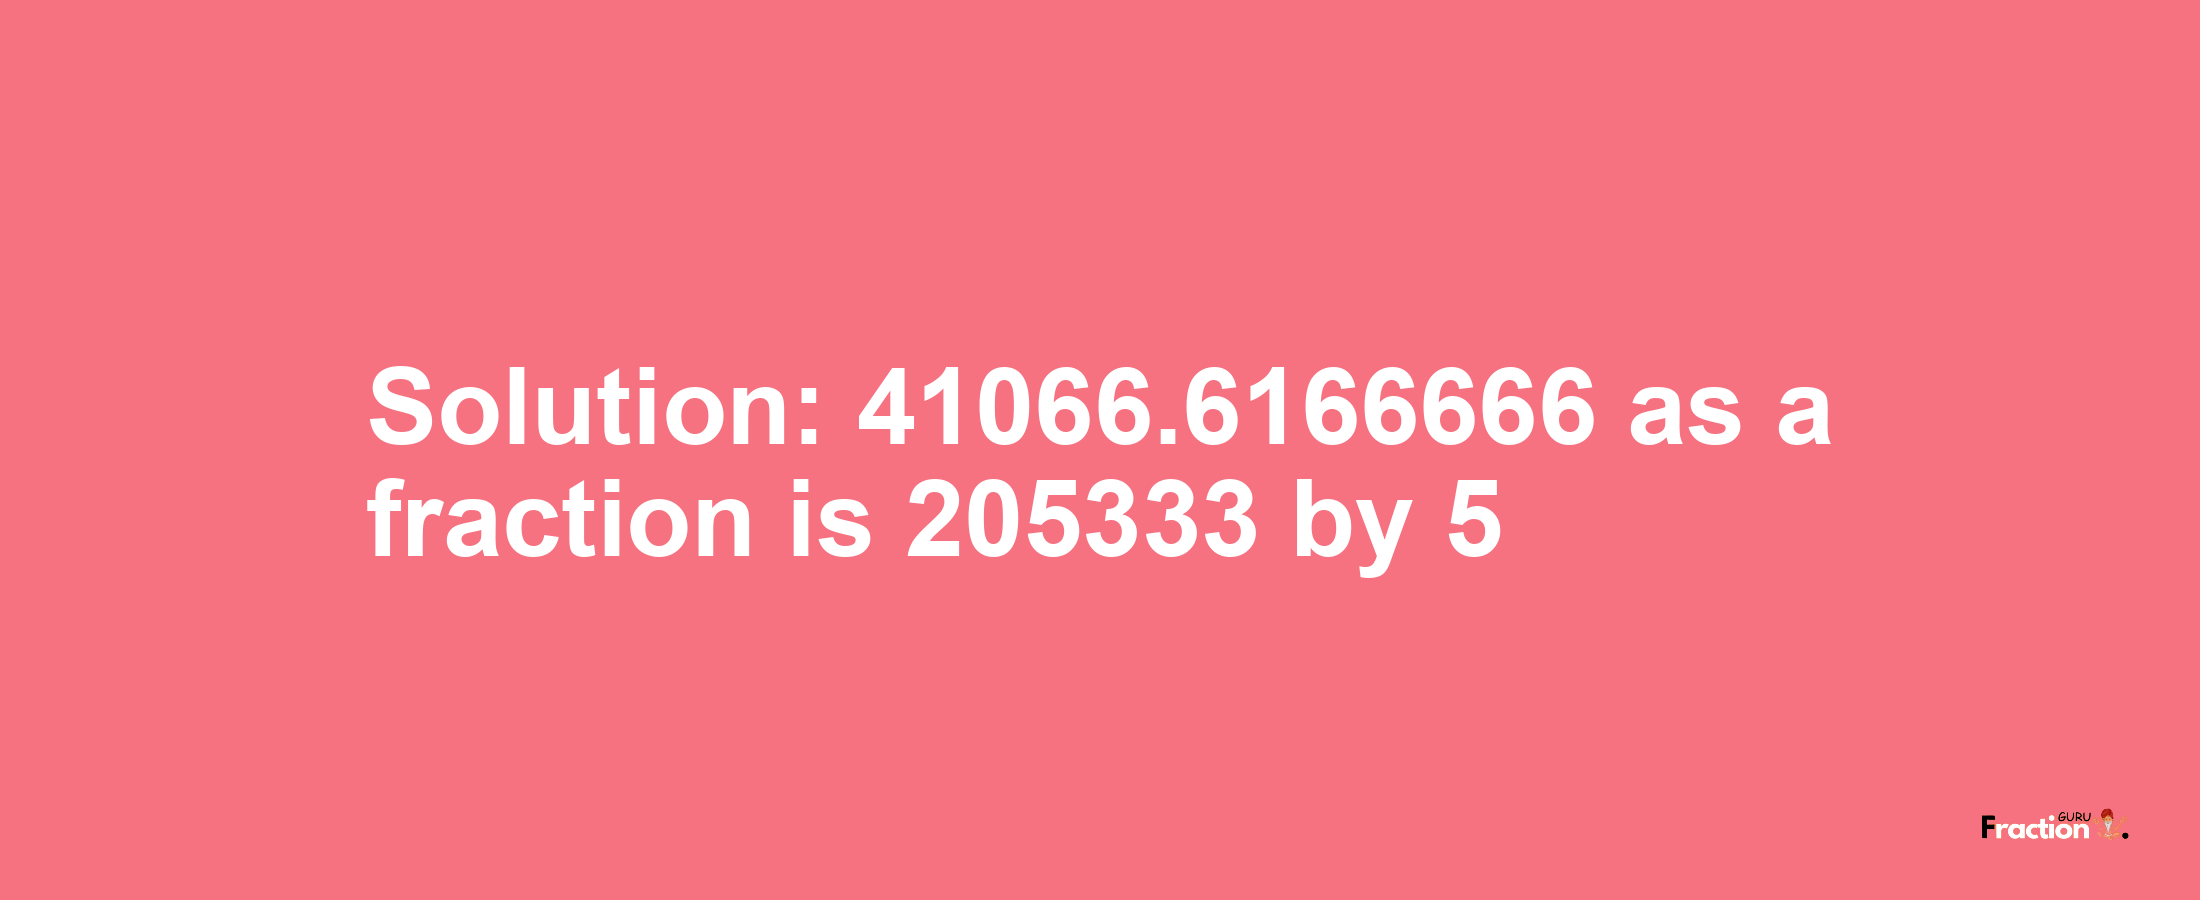 Solution:41066.6166666 as a fraction is 205333/5